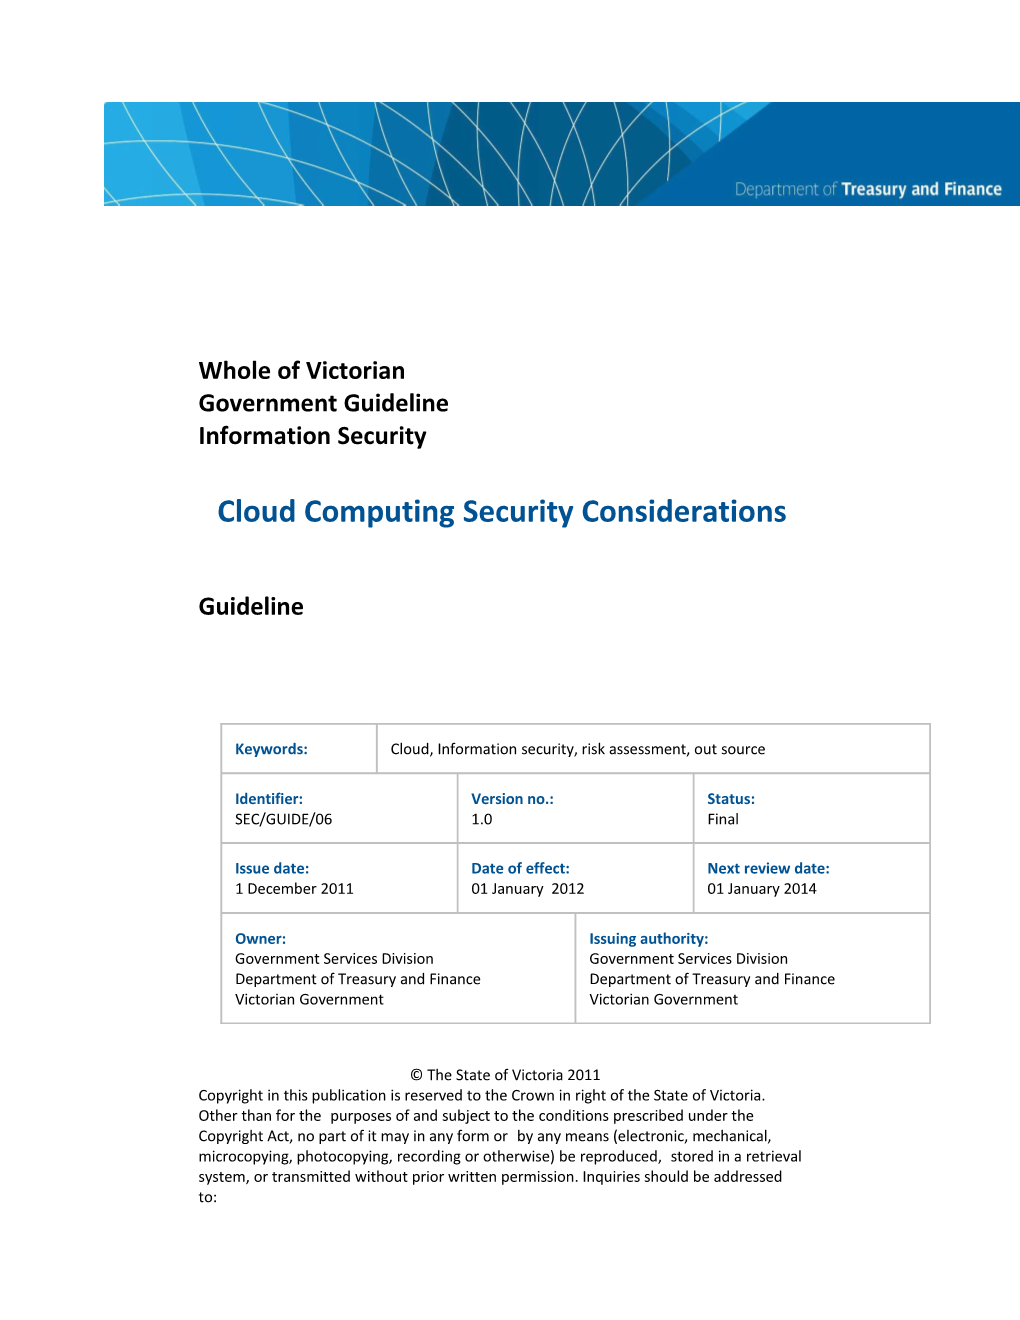 SEC GUIDE 06 - Wovg Guideline - Information Security - Cloud Computing Security Considerations